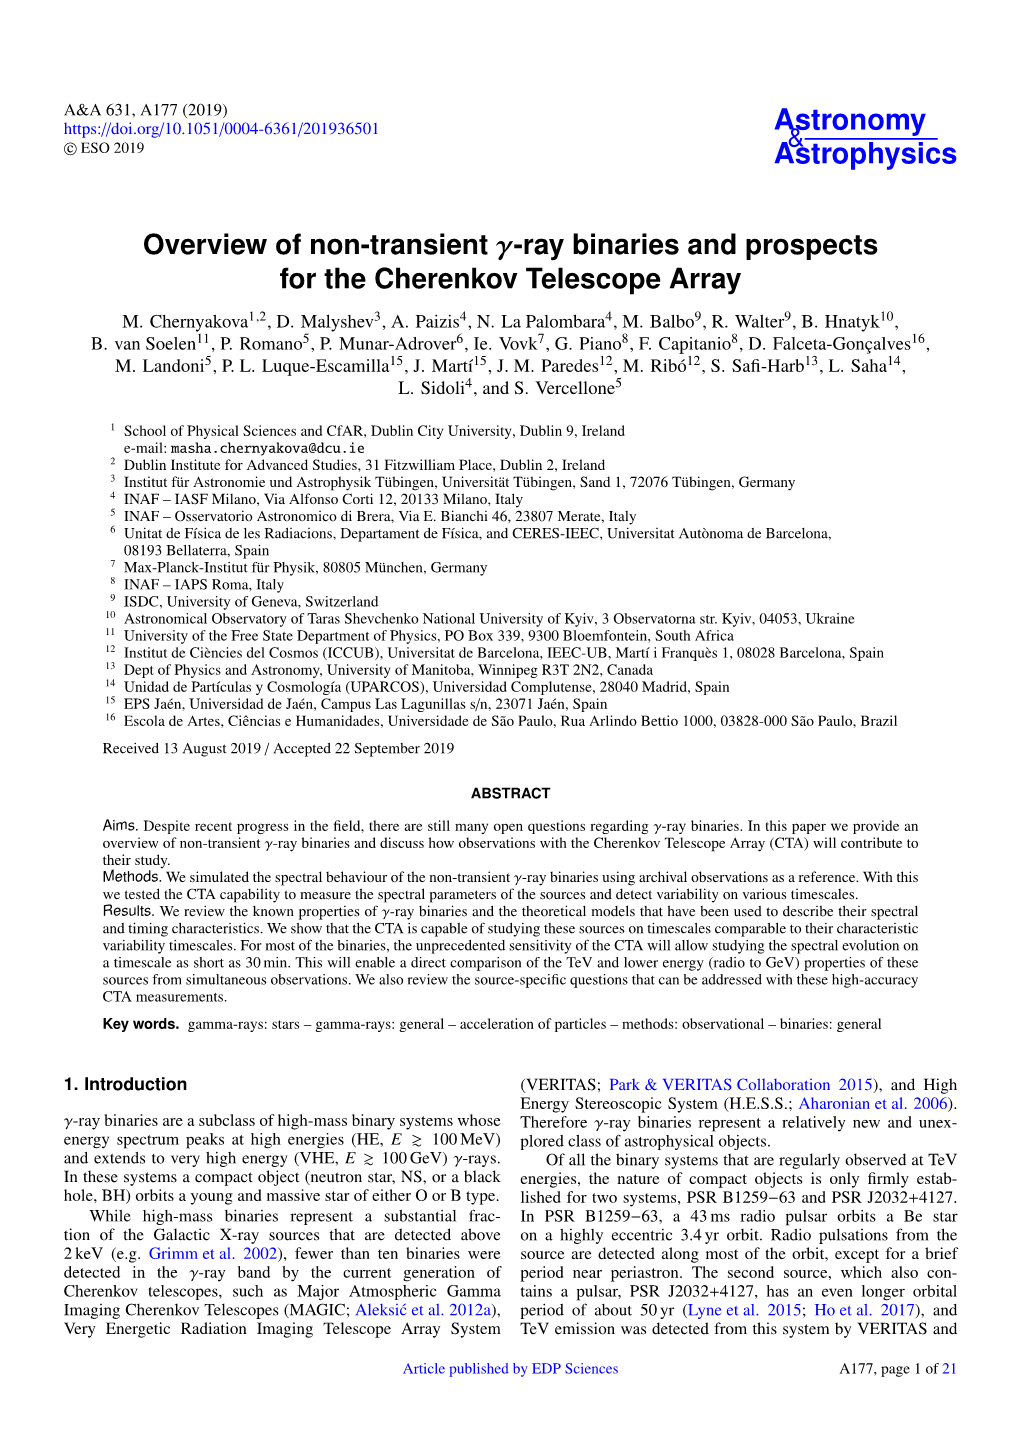 Overview of Non-Transient Γ-Ray Binaries and Prospects for the Cherenkov Telescope Array